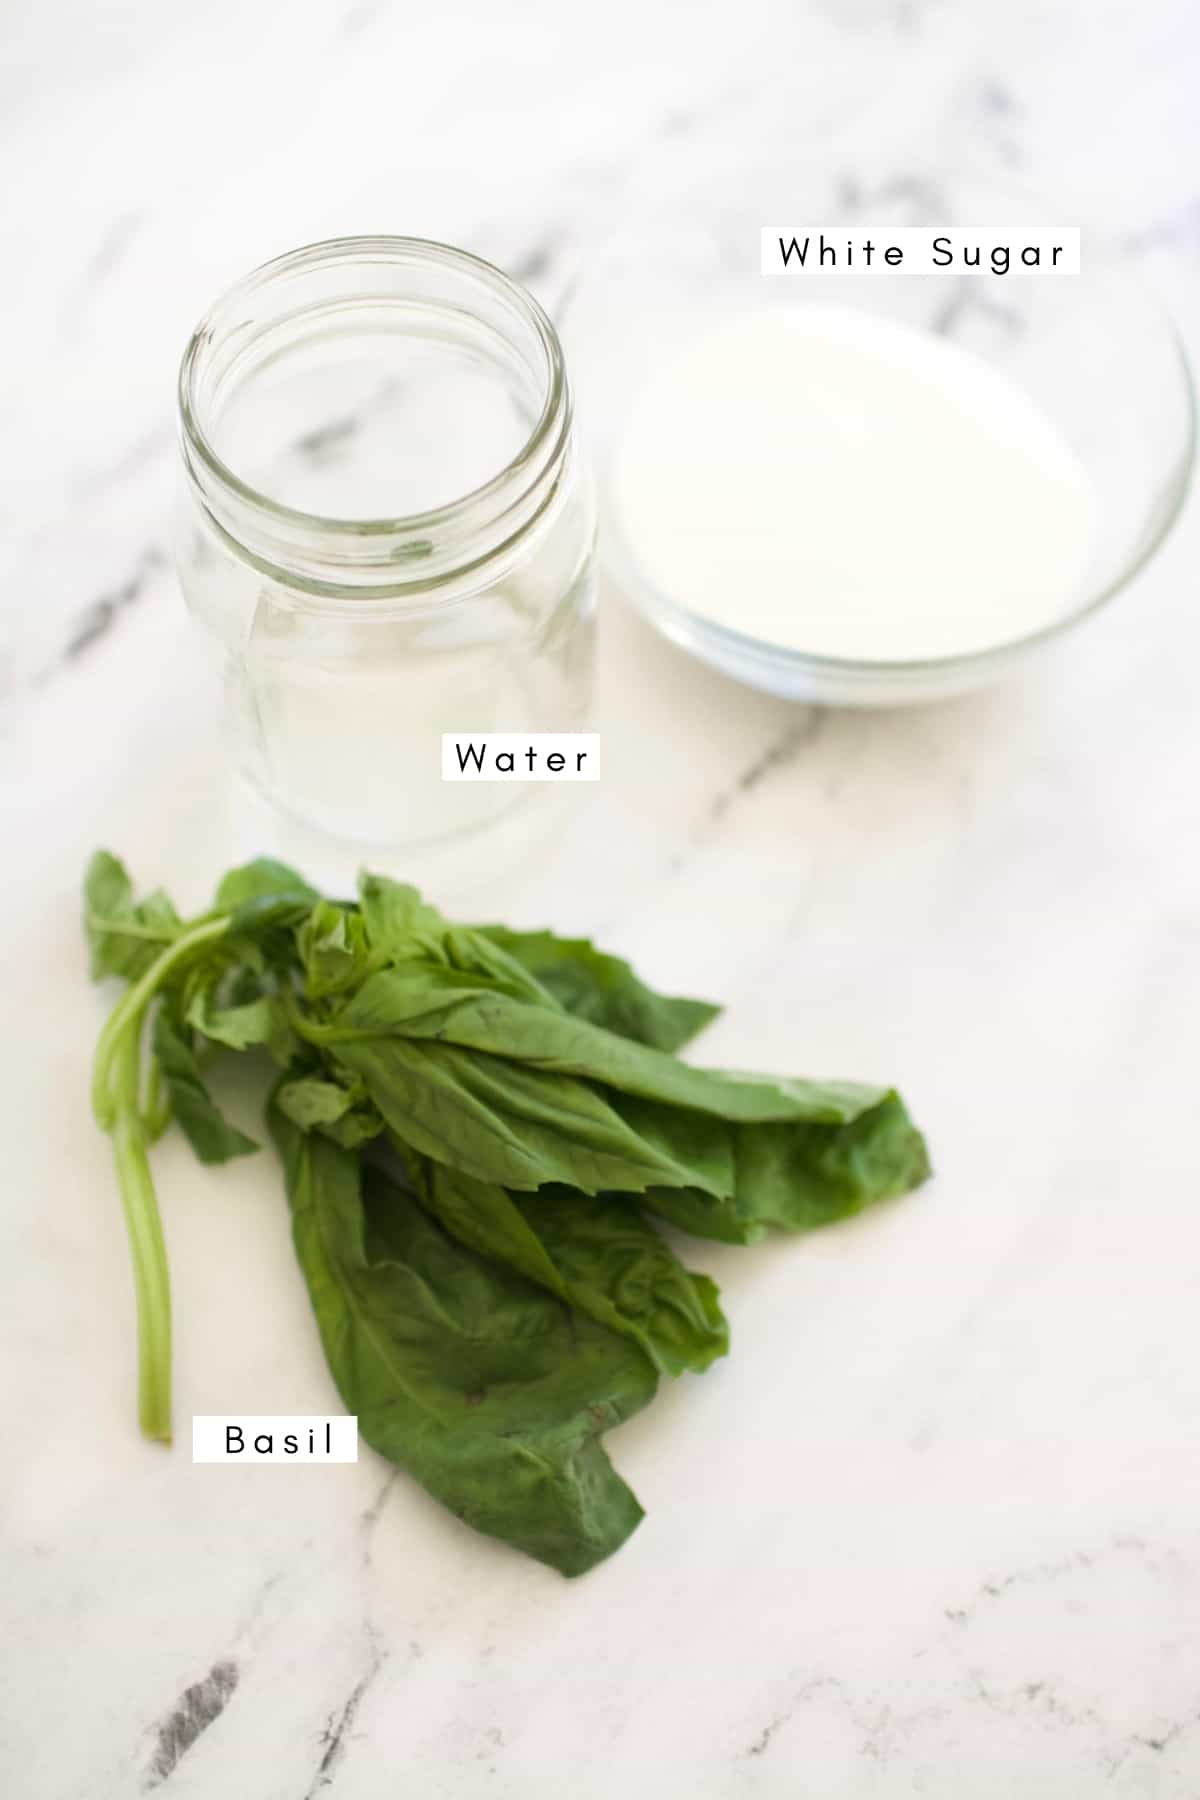 Fresh basil laying on a counter next to a jar of water and a small bowl with white sugar.